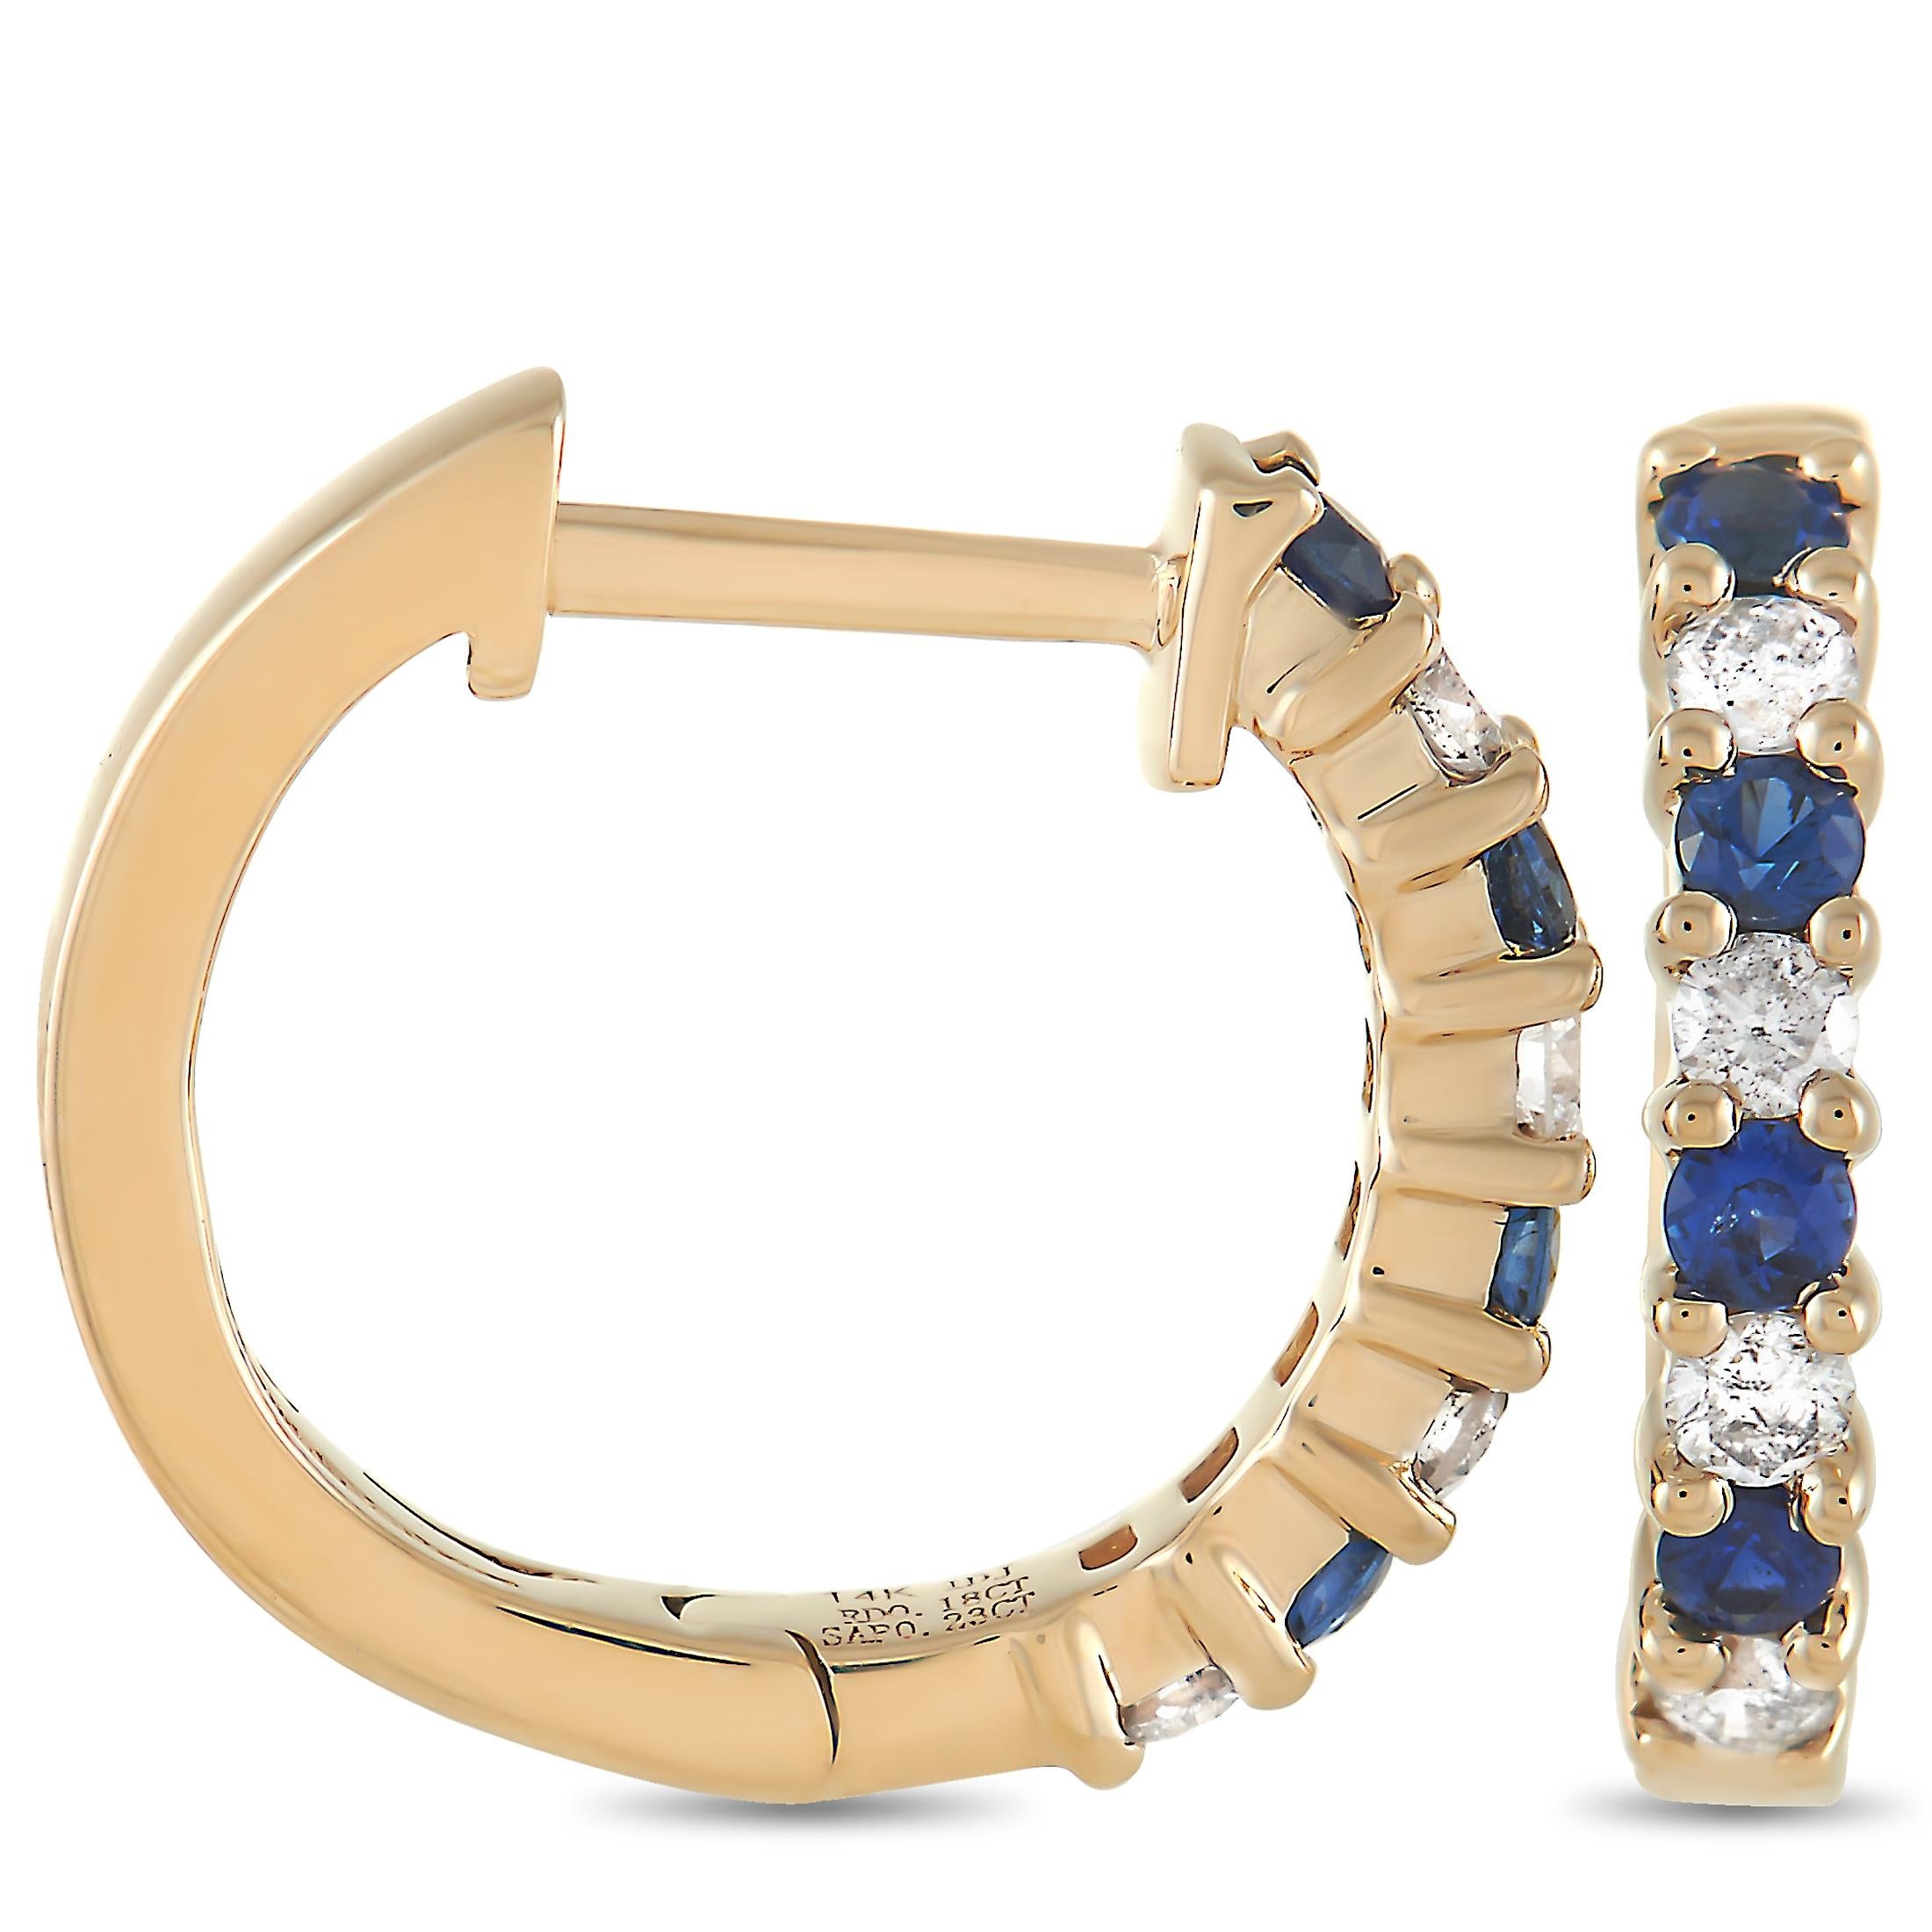 Take any jewelry collection to the next level with the help of these elegant hoop earrings. Made from 14K Yellow Gold, each one measures .5” round and includes a series of alternating gemstones. Together, they feature diamonds totaling 0.17 carats